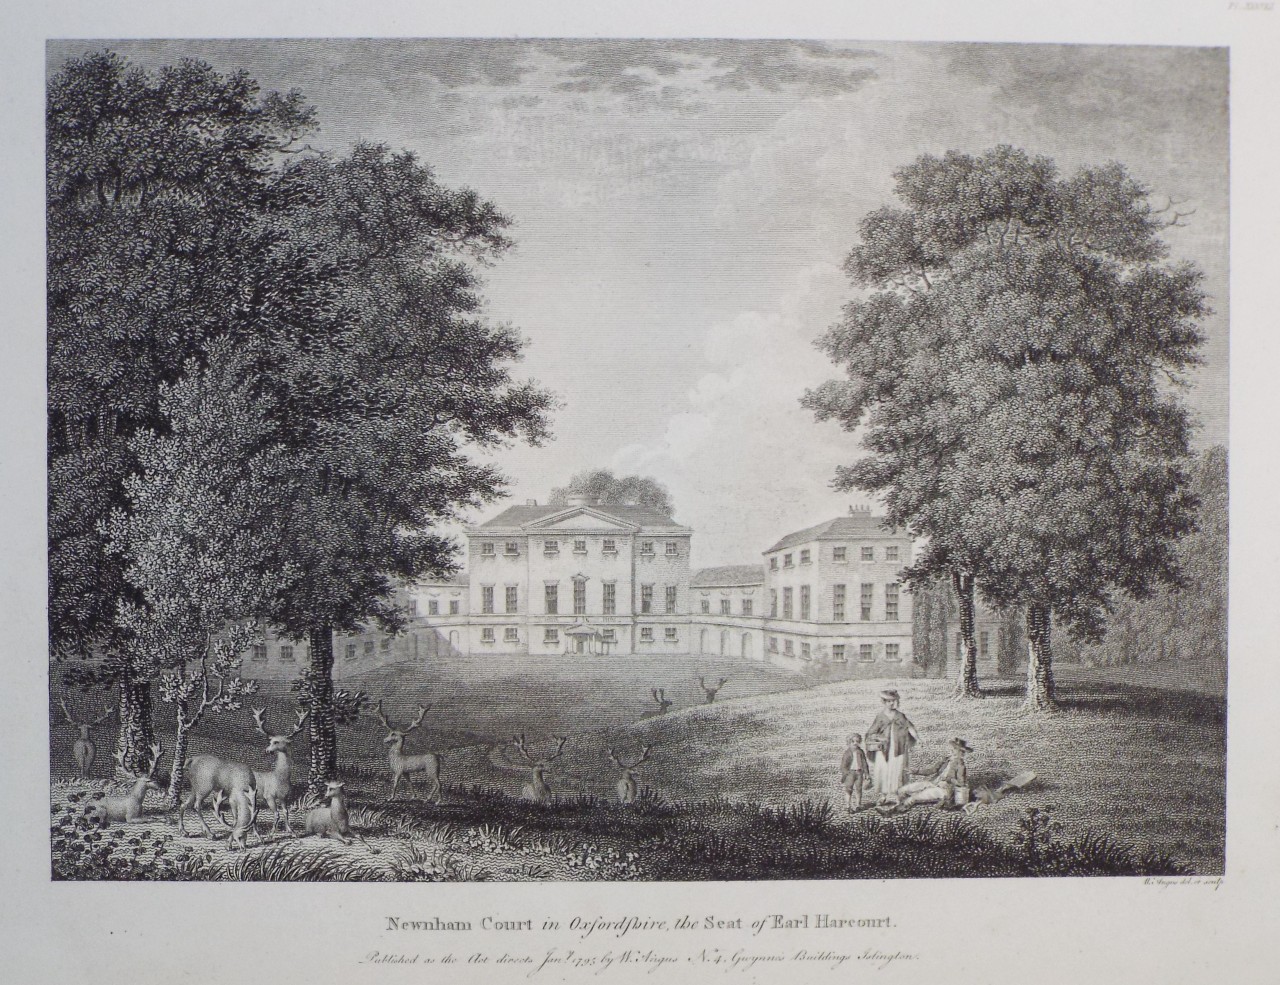 Print - Newnham Court in Oxfordshire, the Seat of Earl Harcourt. - Angus